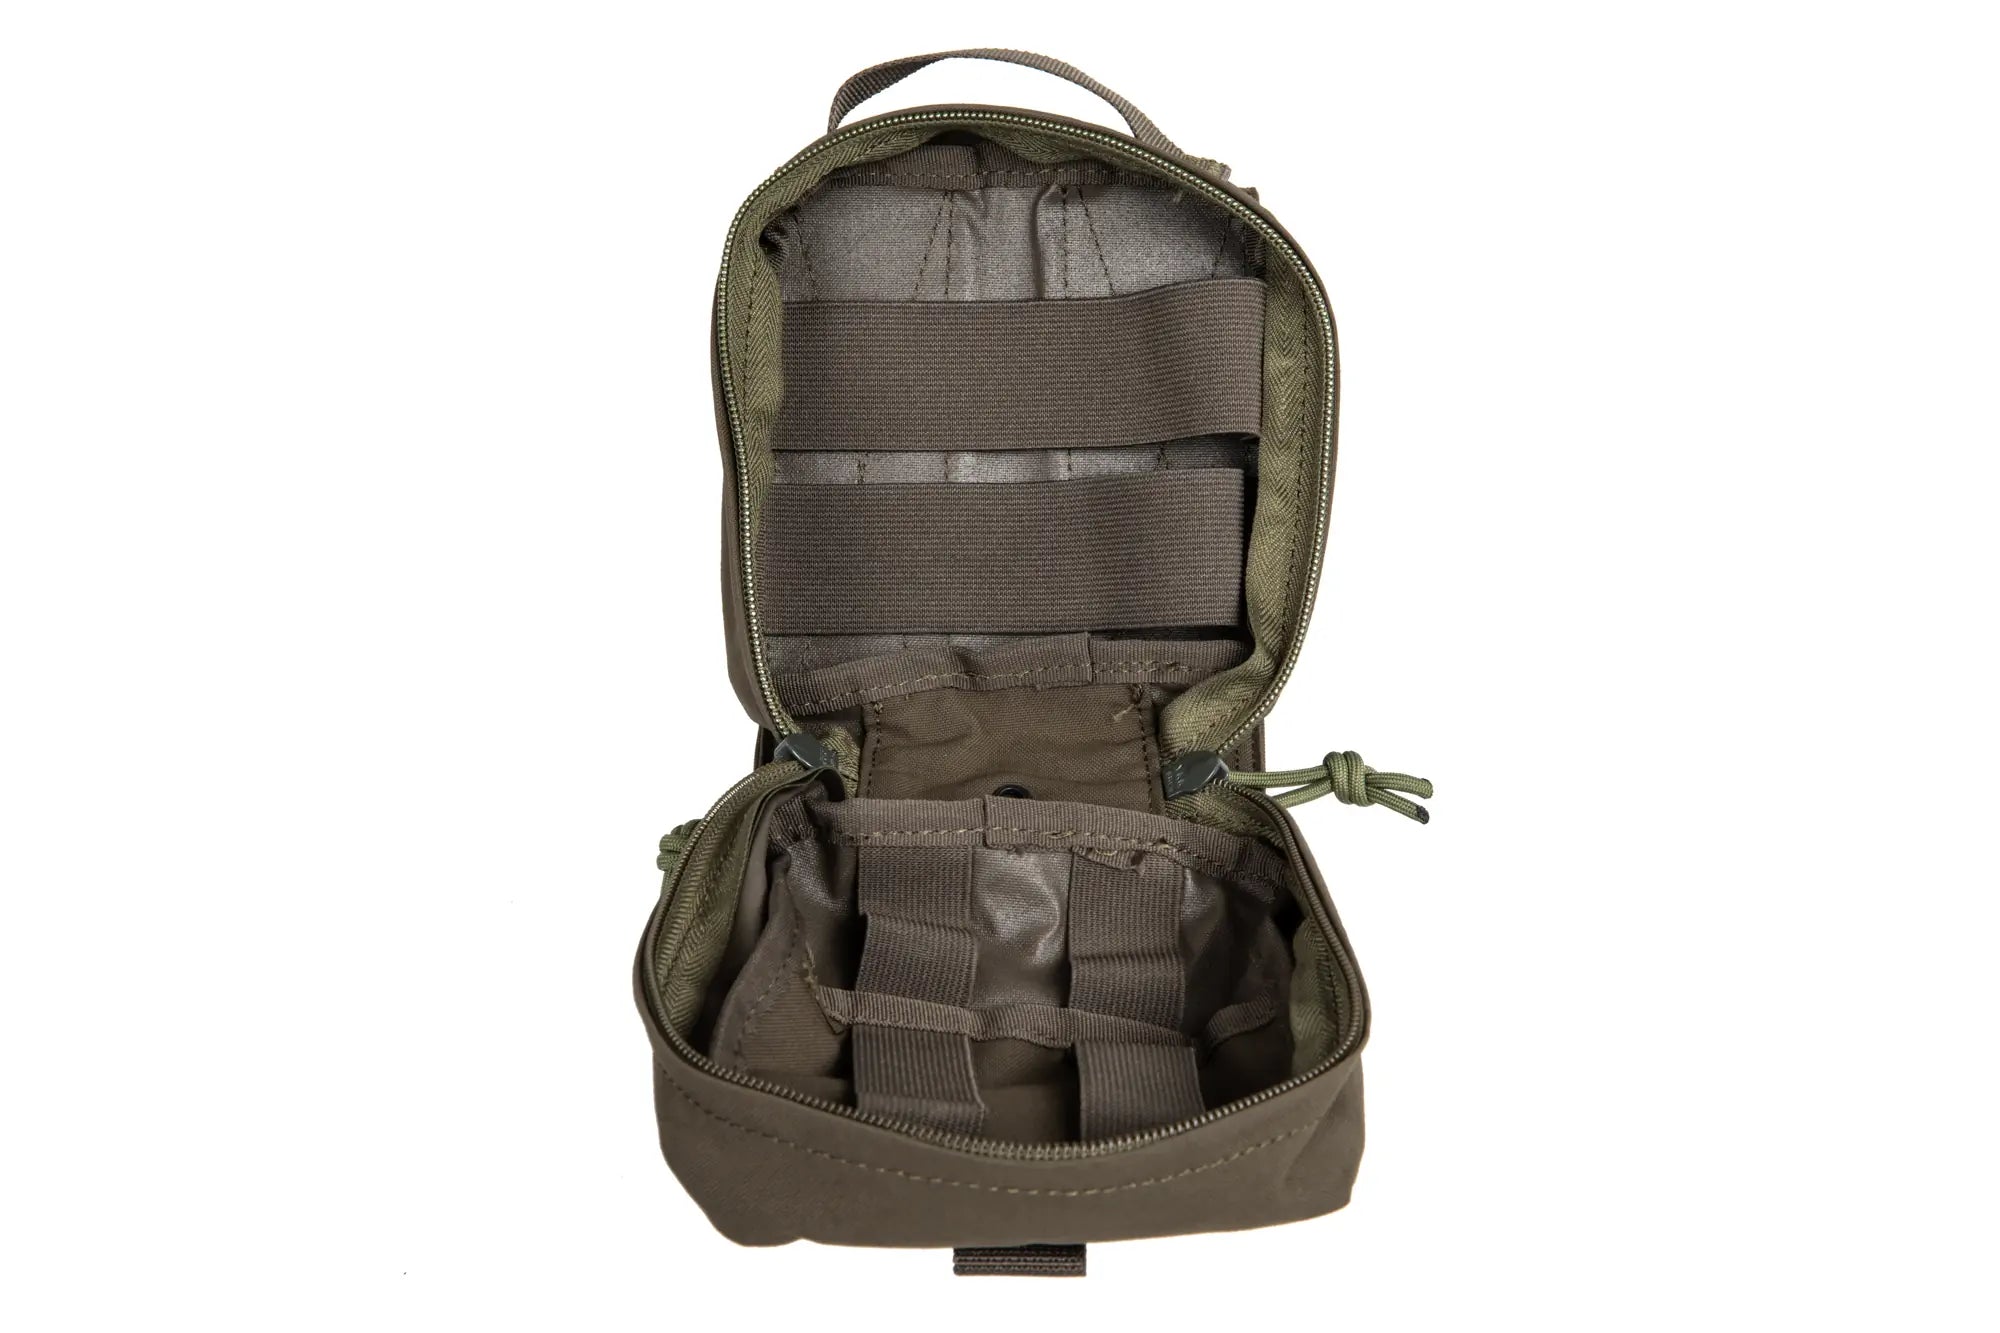 First aid kit with Molle panel Wosport Ranger Green